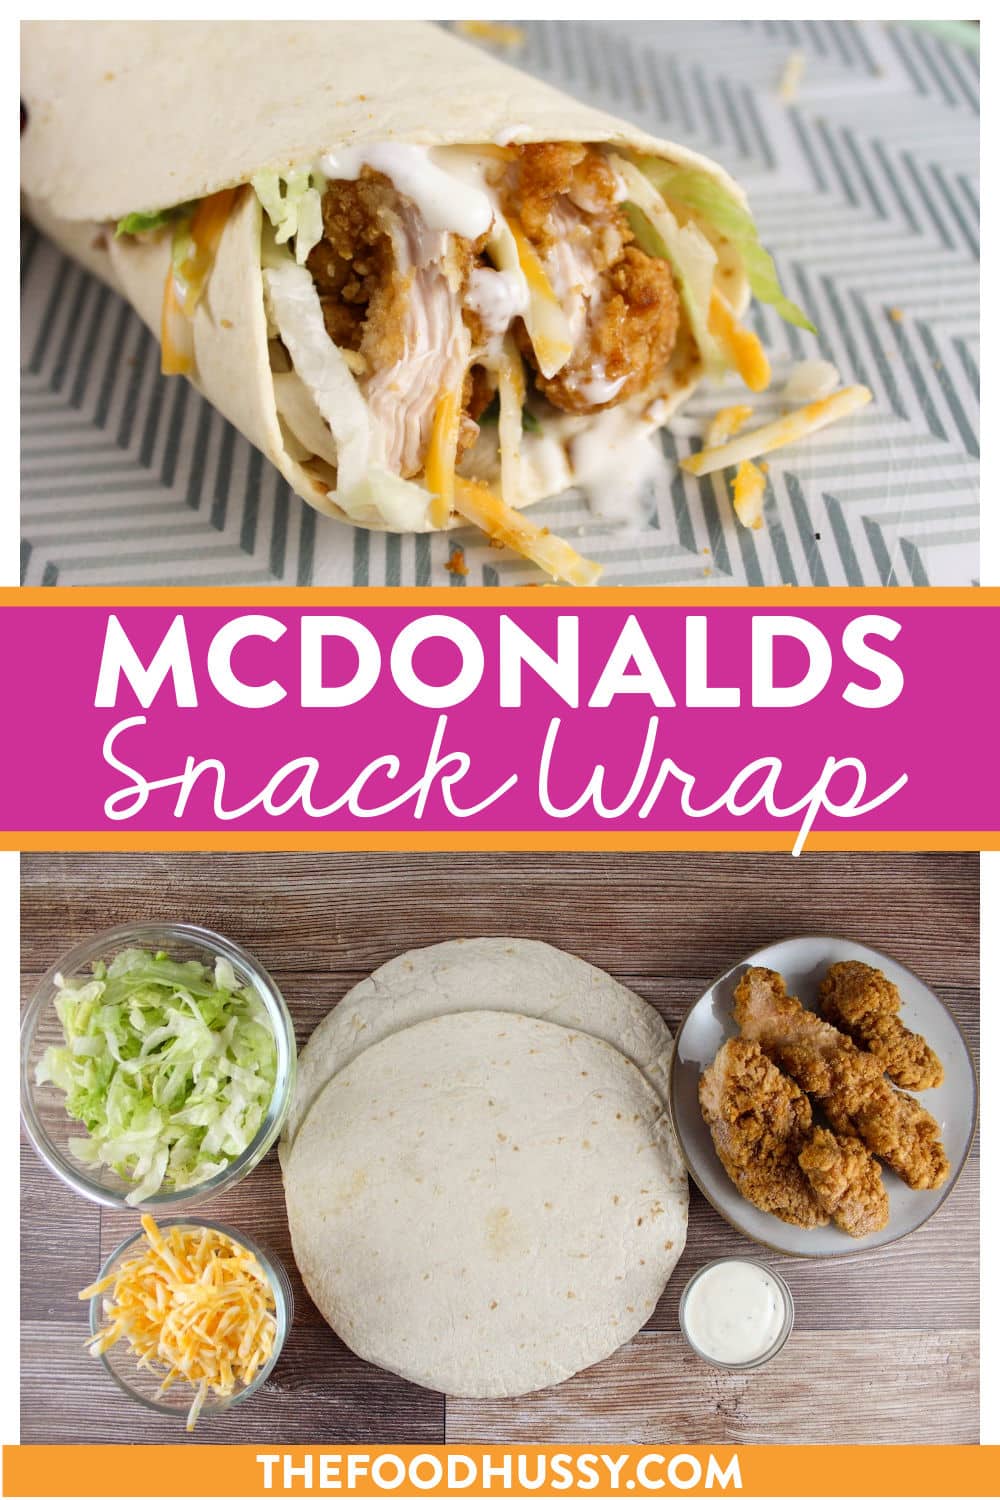 McDonalds Snack Wrap isn't on the menu anymore but you can whip them up at home in just 10 minutes! A quick and tasty snack with breaded chicken strips, colby jack cheese, shredded lettuce and a drizzle of ranch dressing.  via @foodhussy